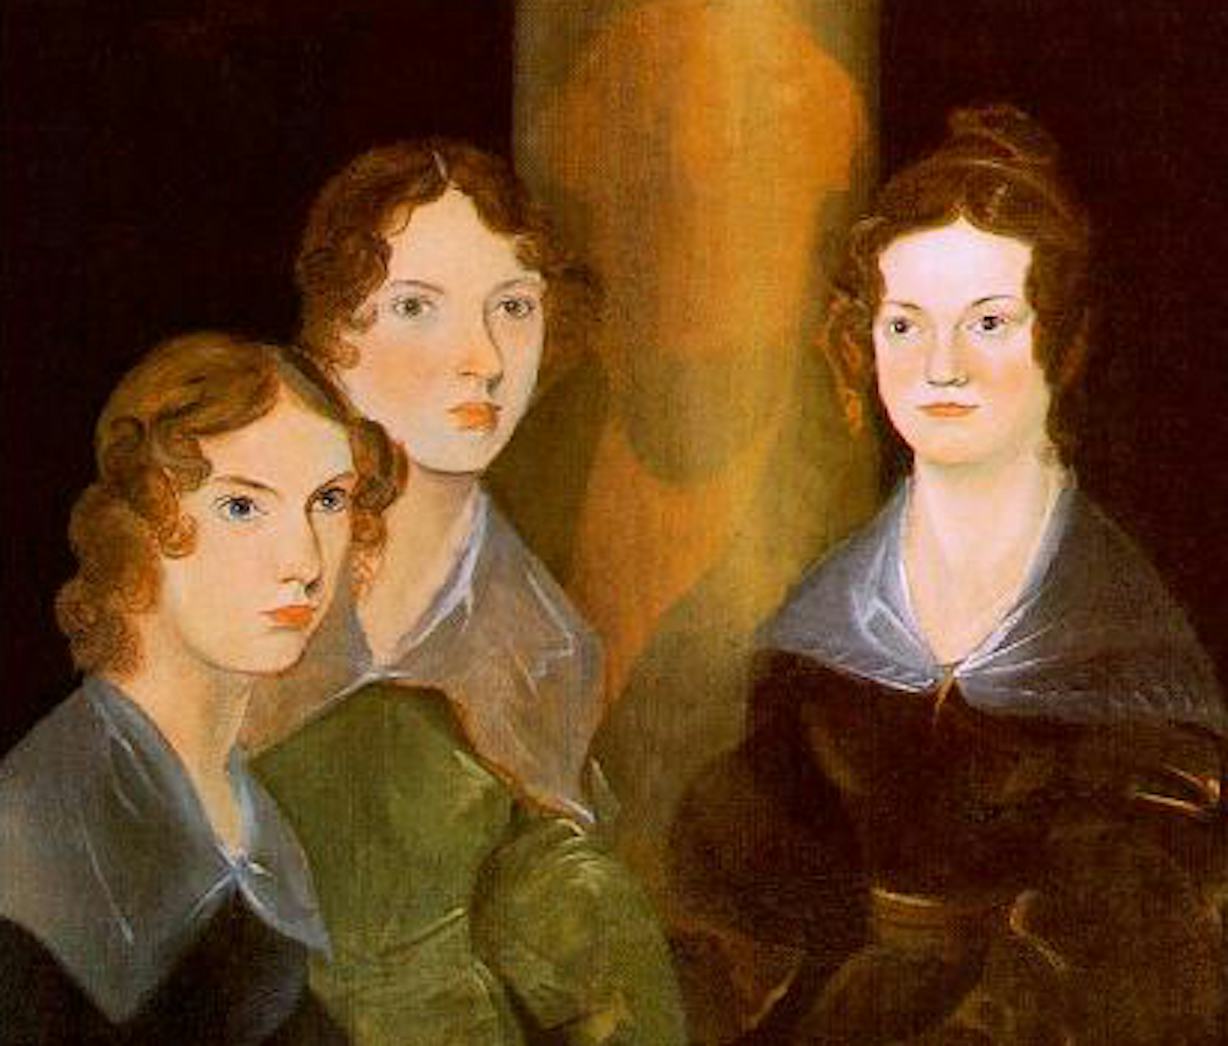 The Bbc Is Making A Tv Drama About The Bronte Sisters And We Are All